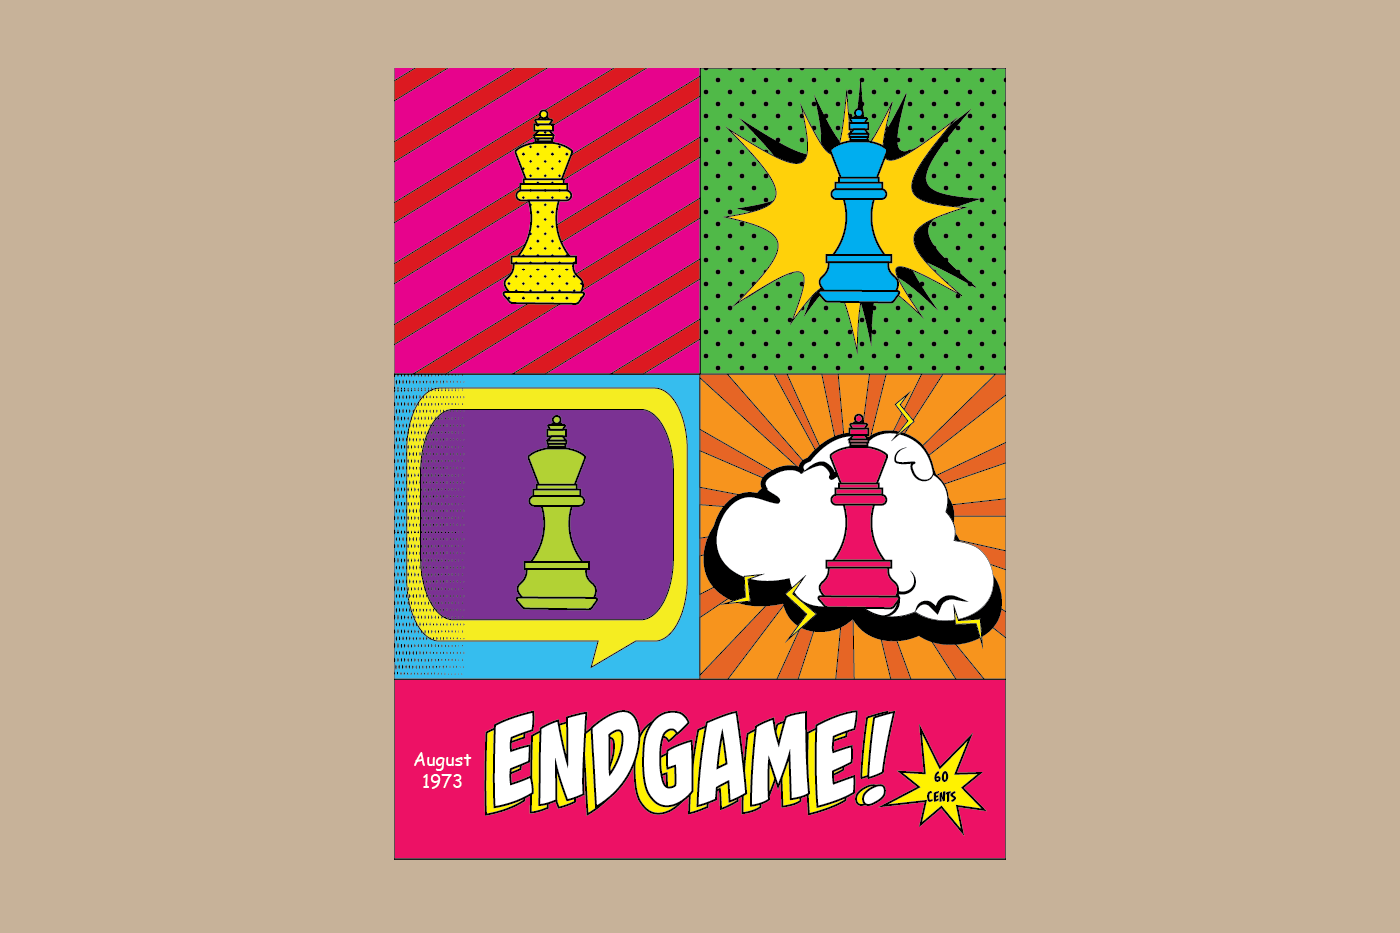 Chess magazine cover inspired by 20th century pop art elements. 

